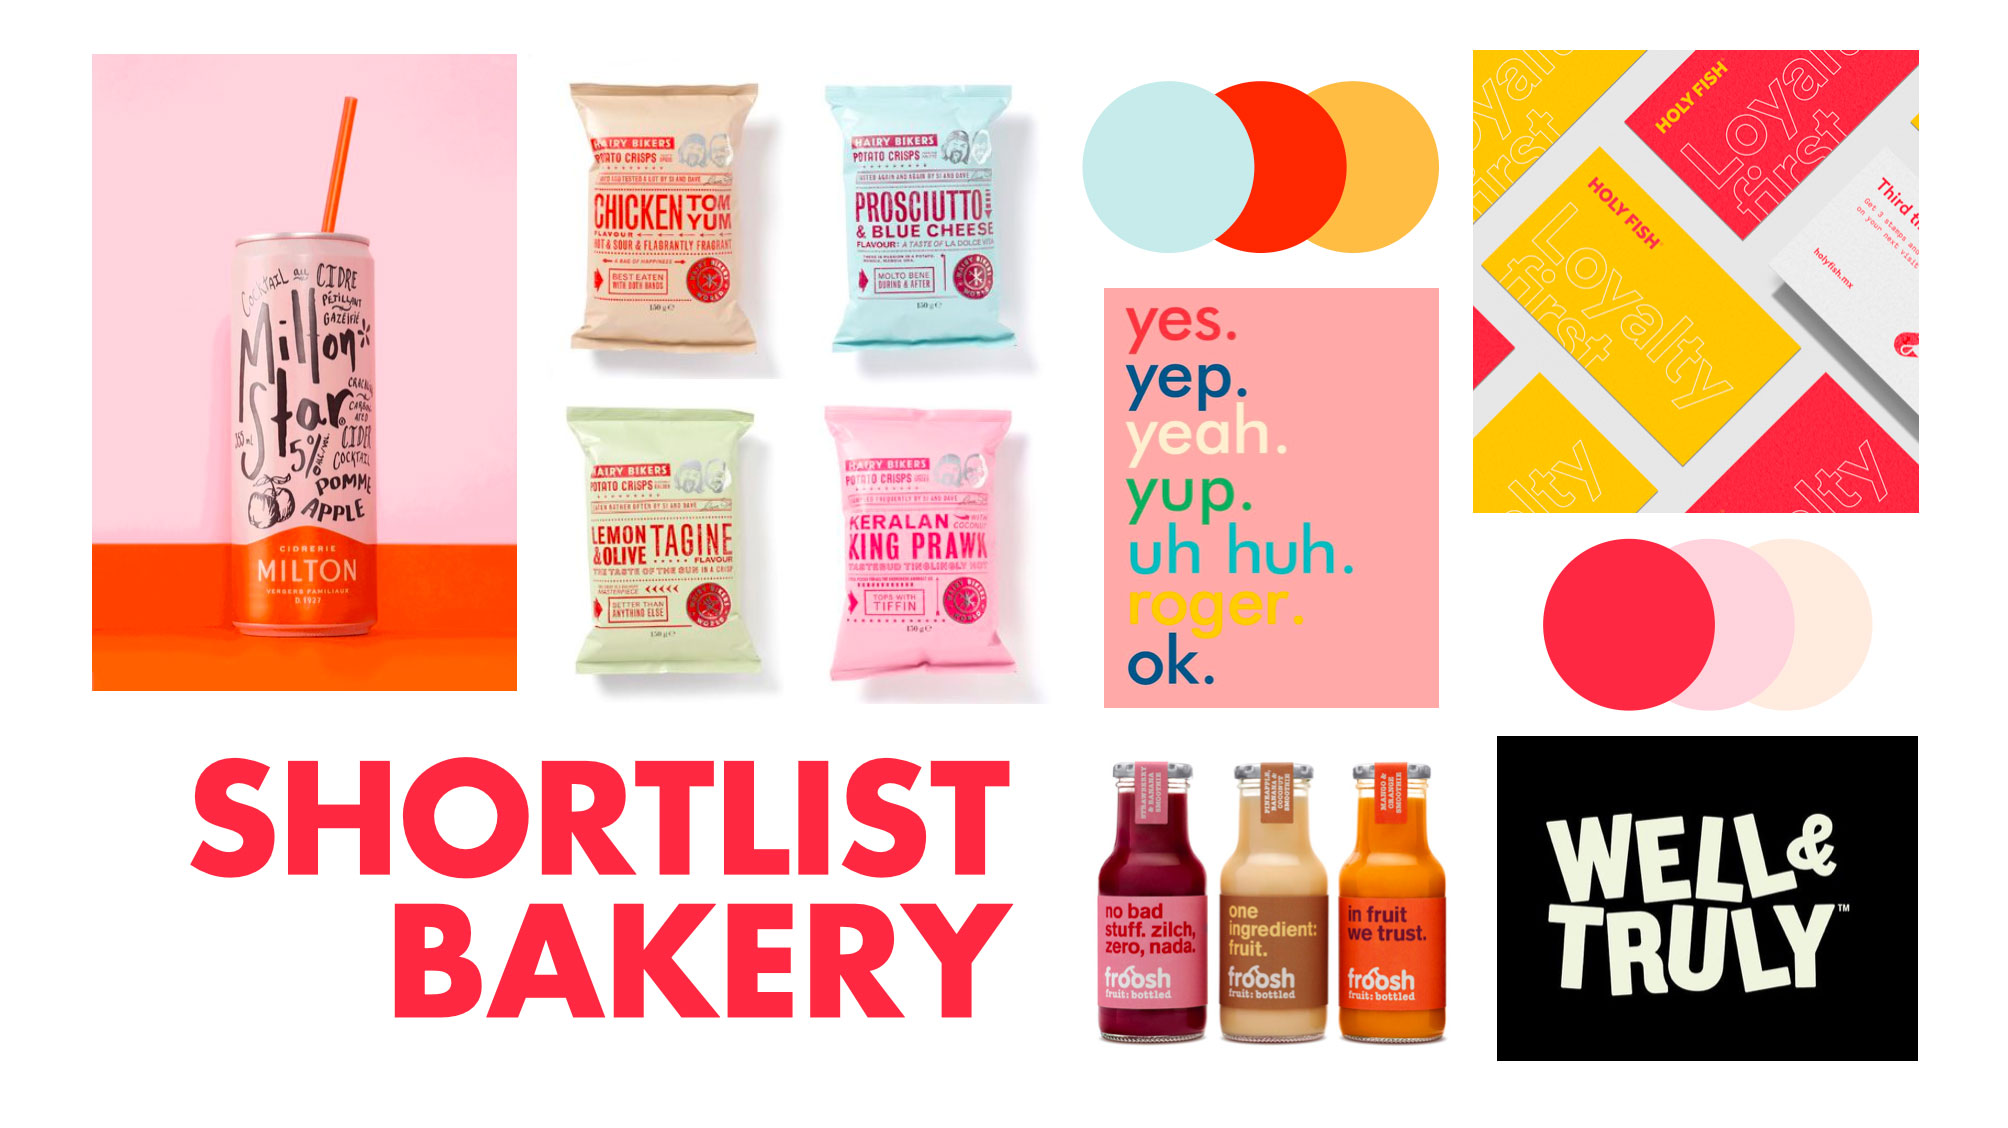 Moodboard for another potential brand for the cookies, Shortlist Bakery